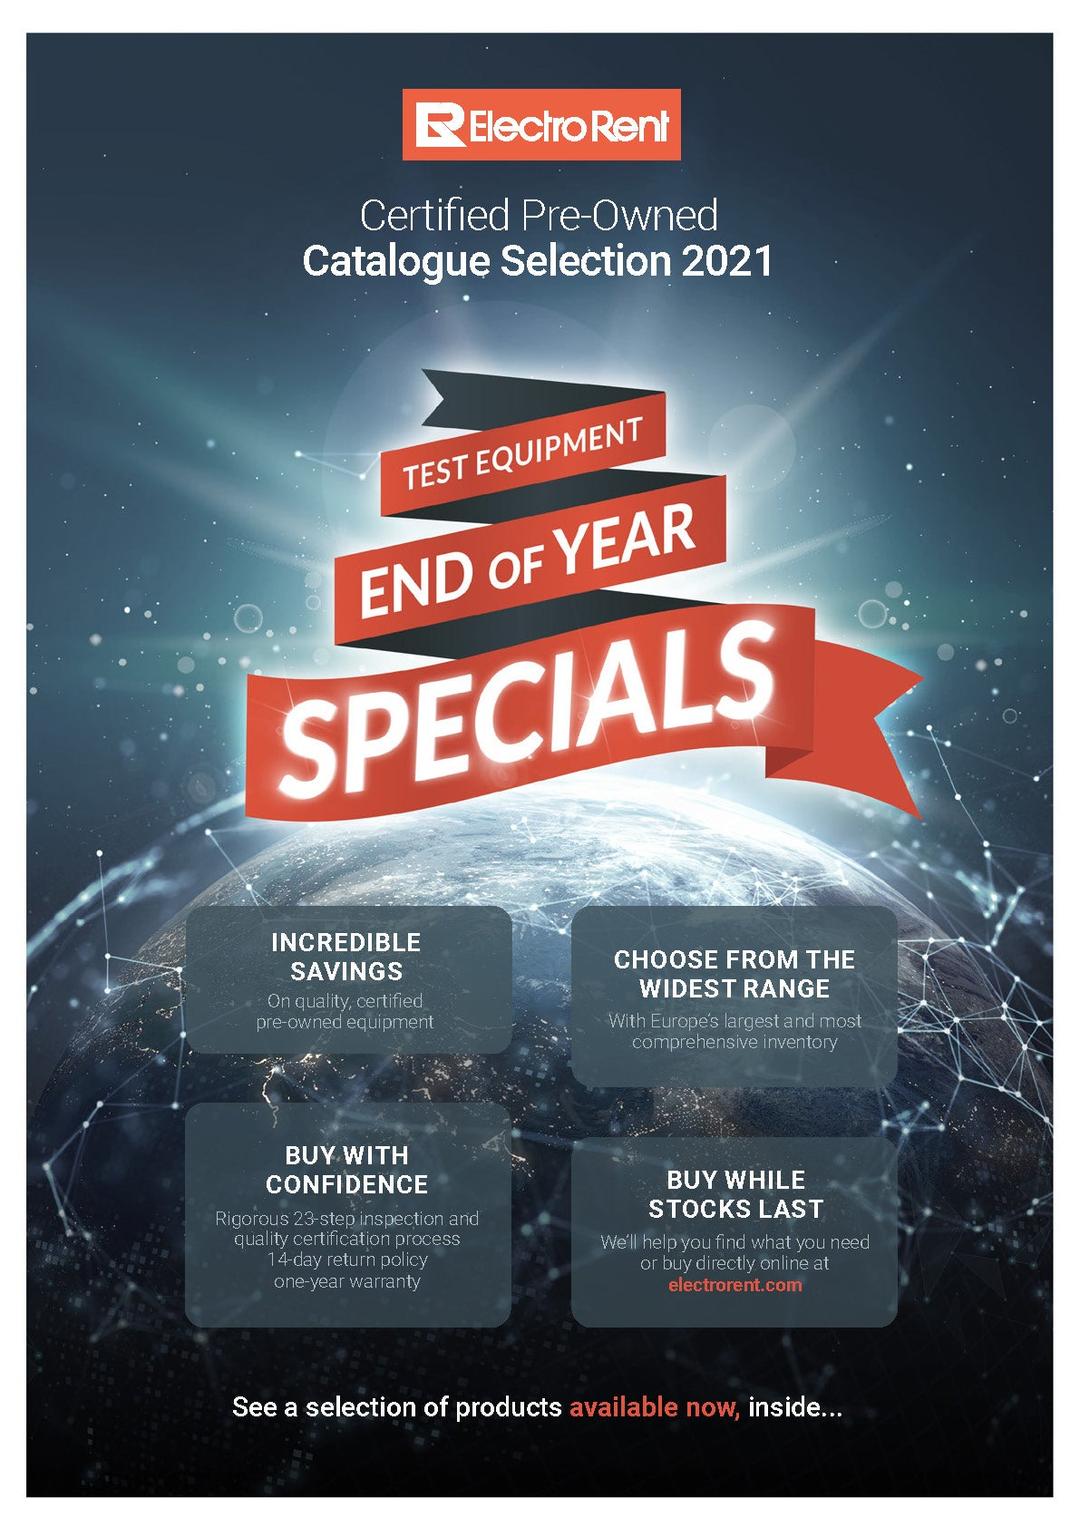 Certified Pre-Owned Catalogue 2021, image